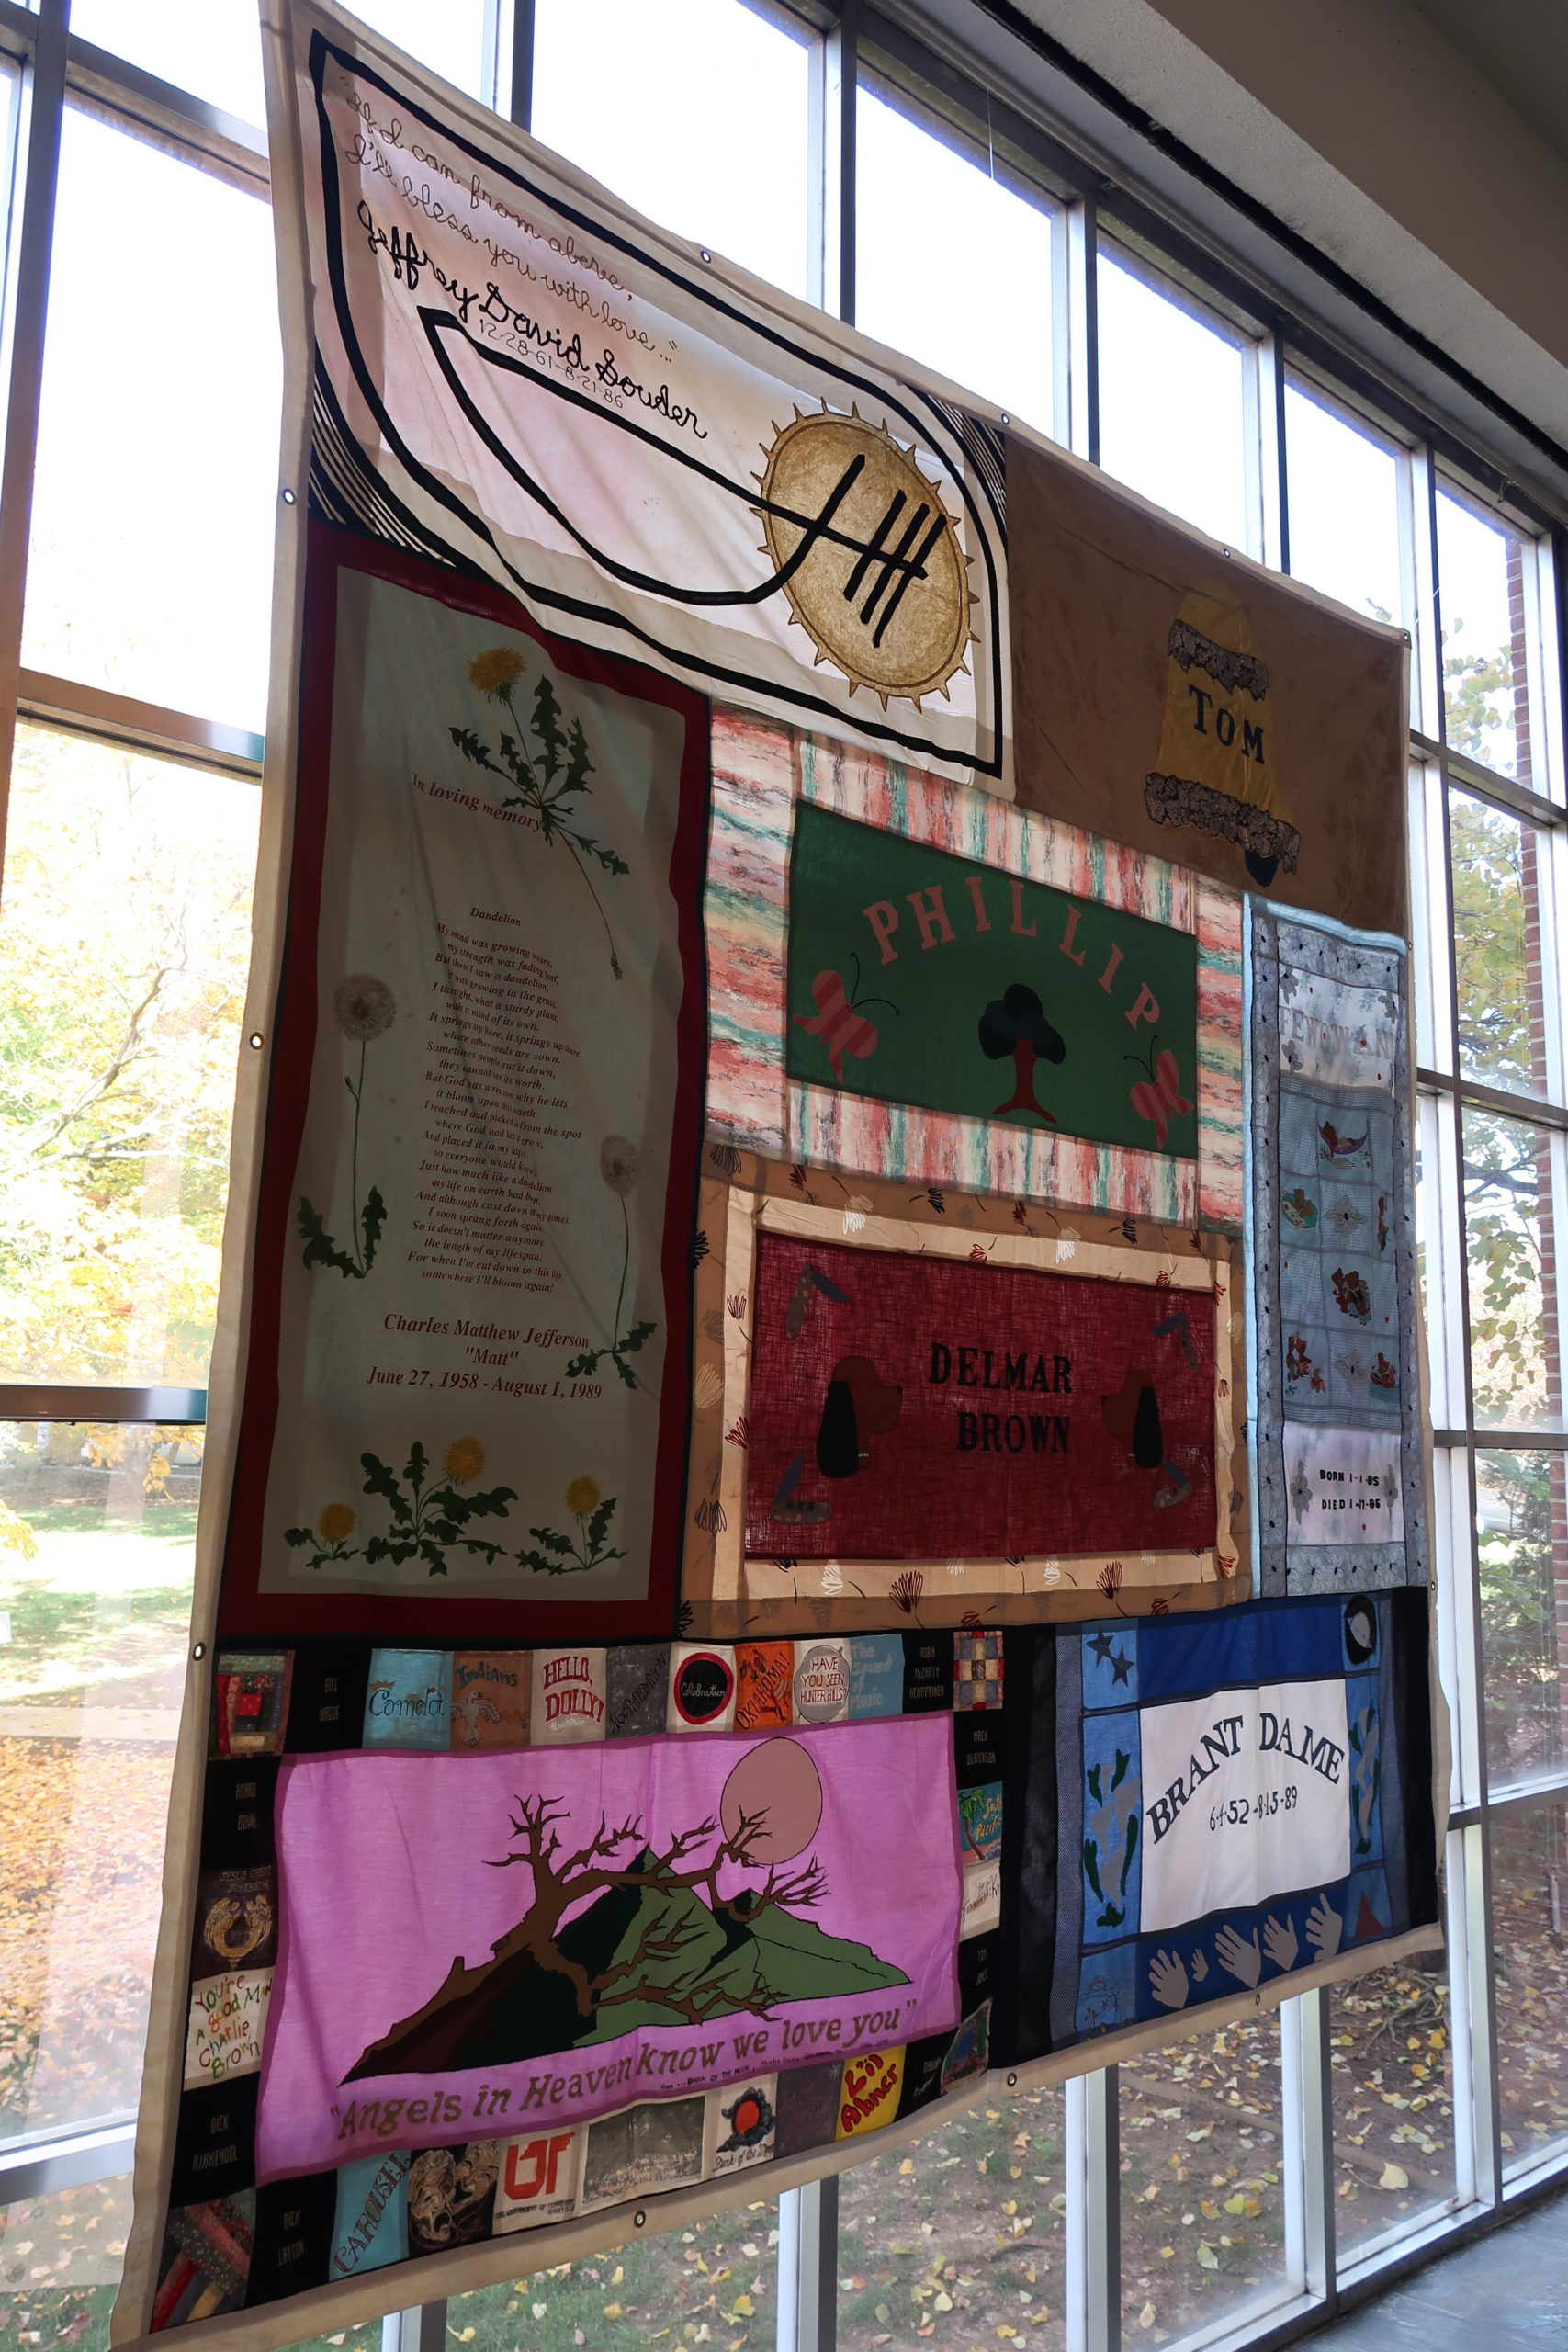 AIDS Quilt in a window